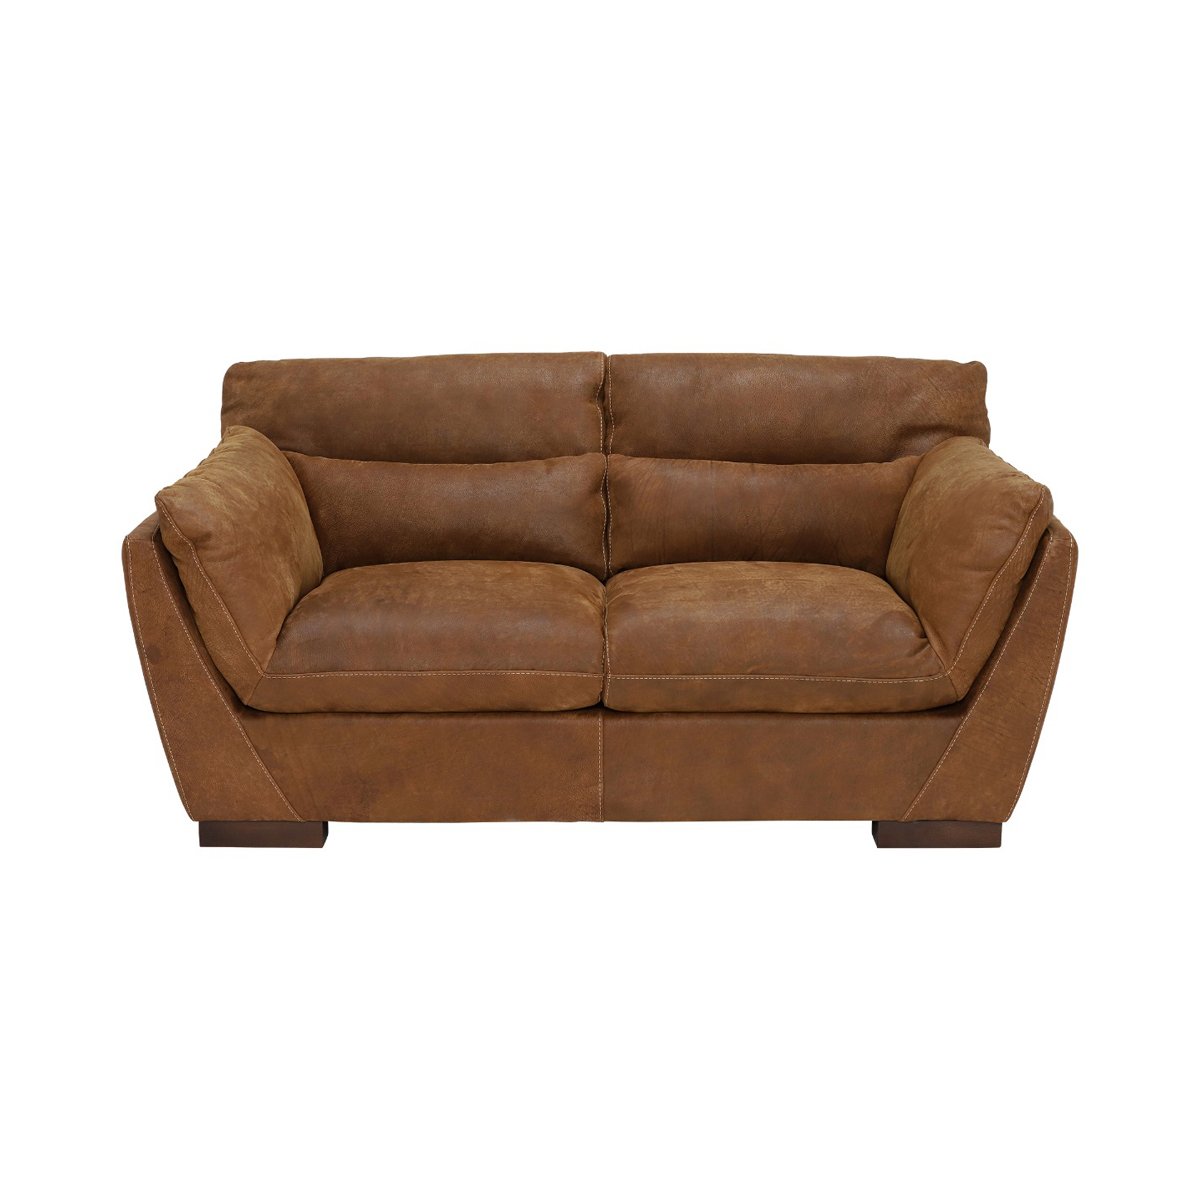 Marnie Loveseat Sofa, Brown Leather | Barker & Stonehouse